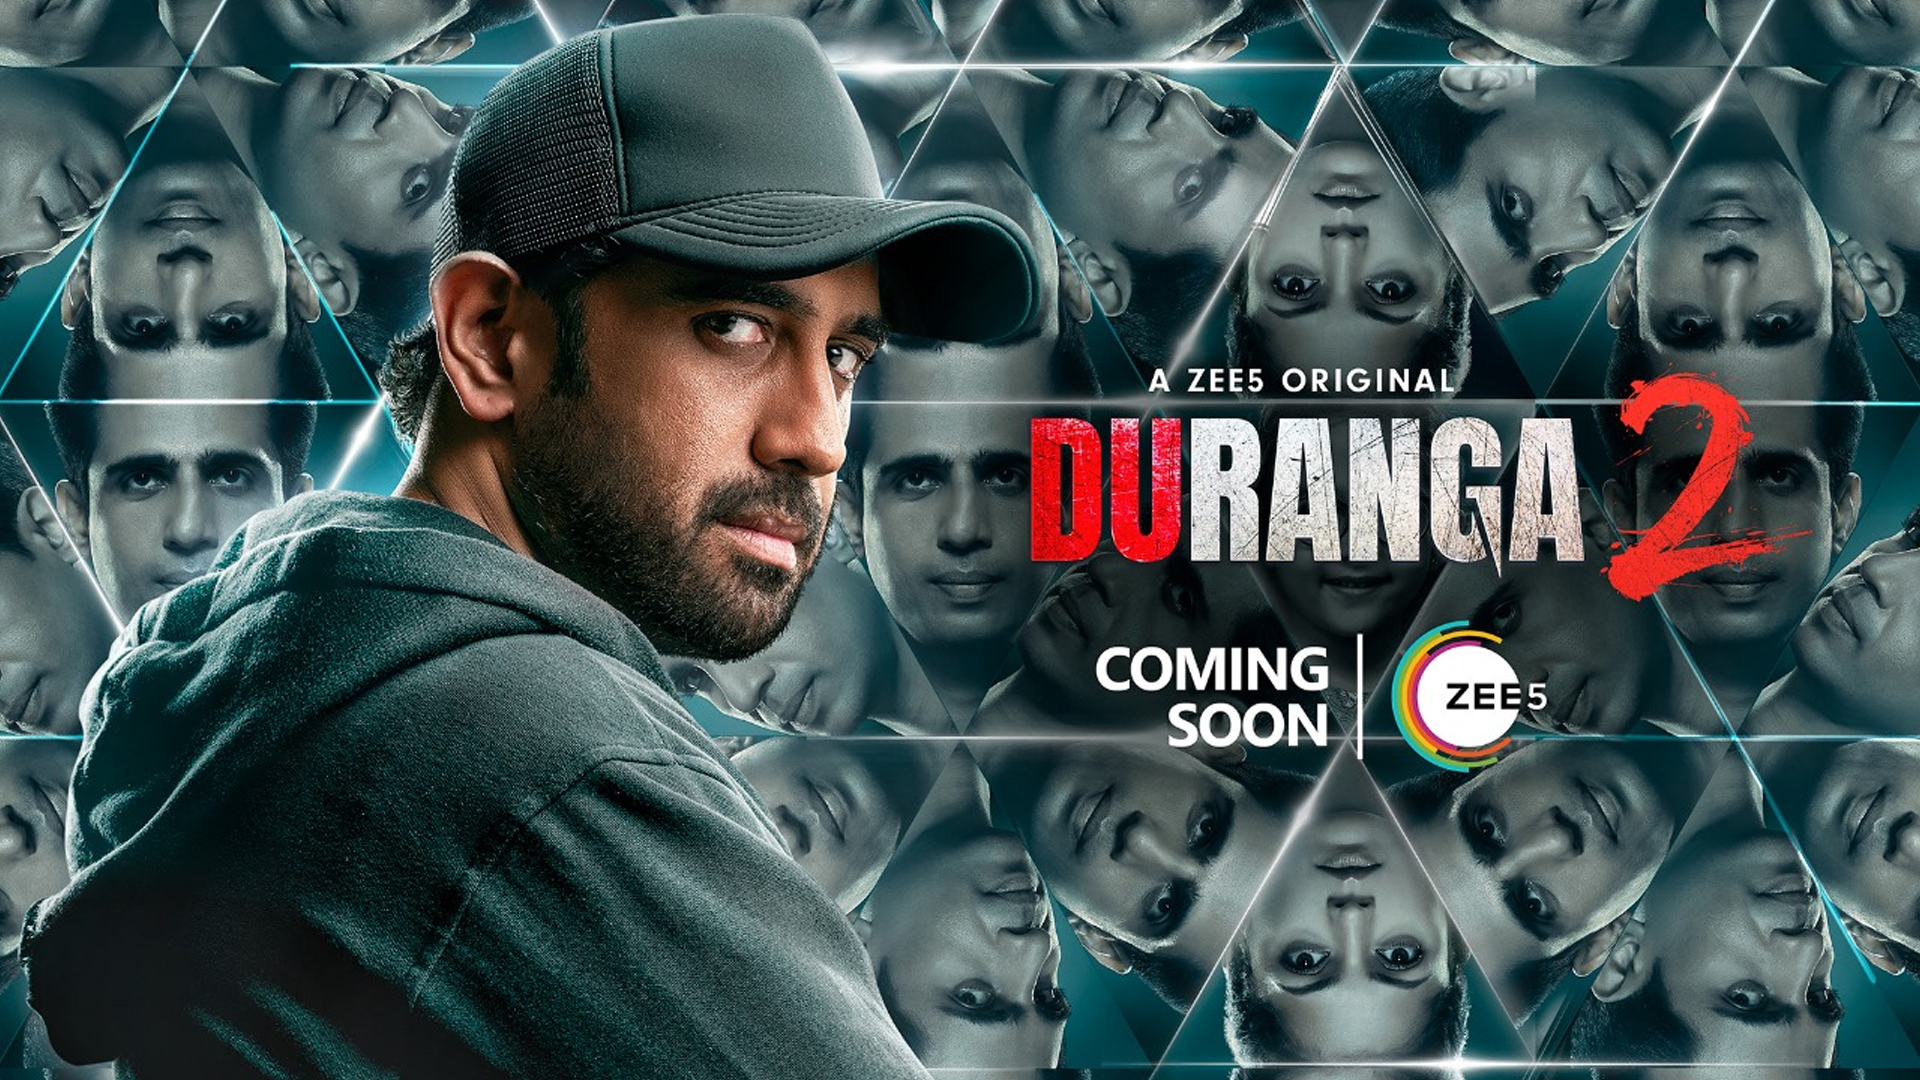 ZEE5 unveils the first look of the much-awaited sequel of the successful romantic thriller series Duranga